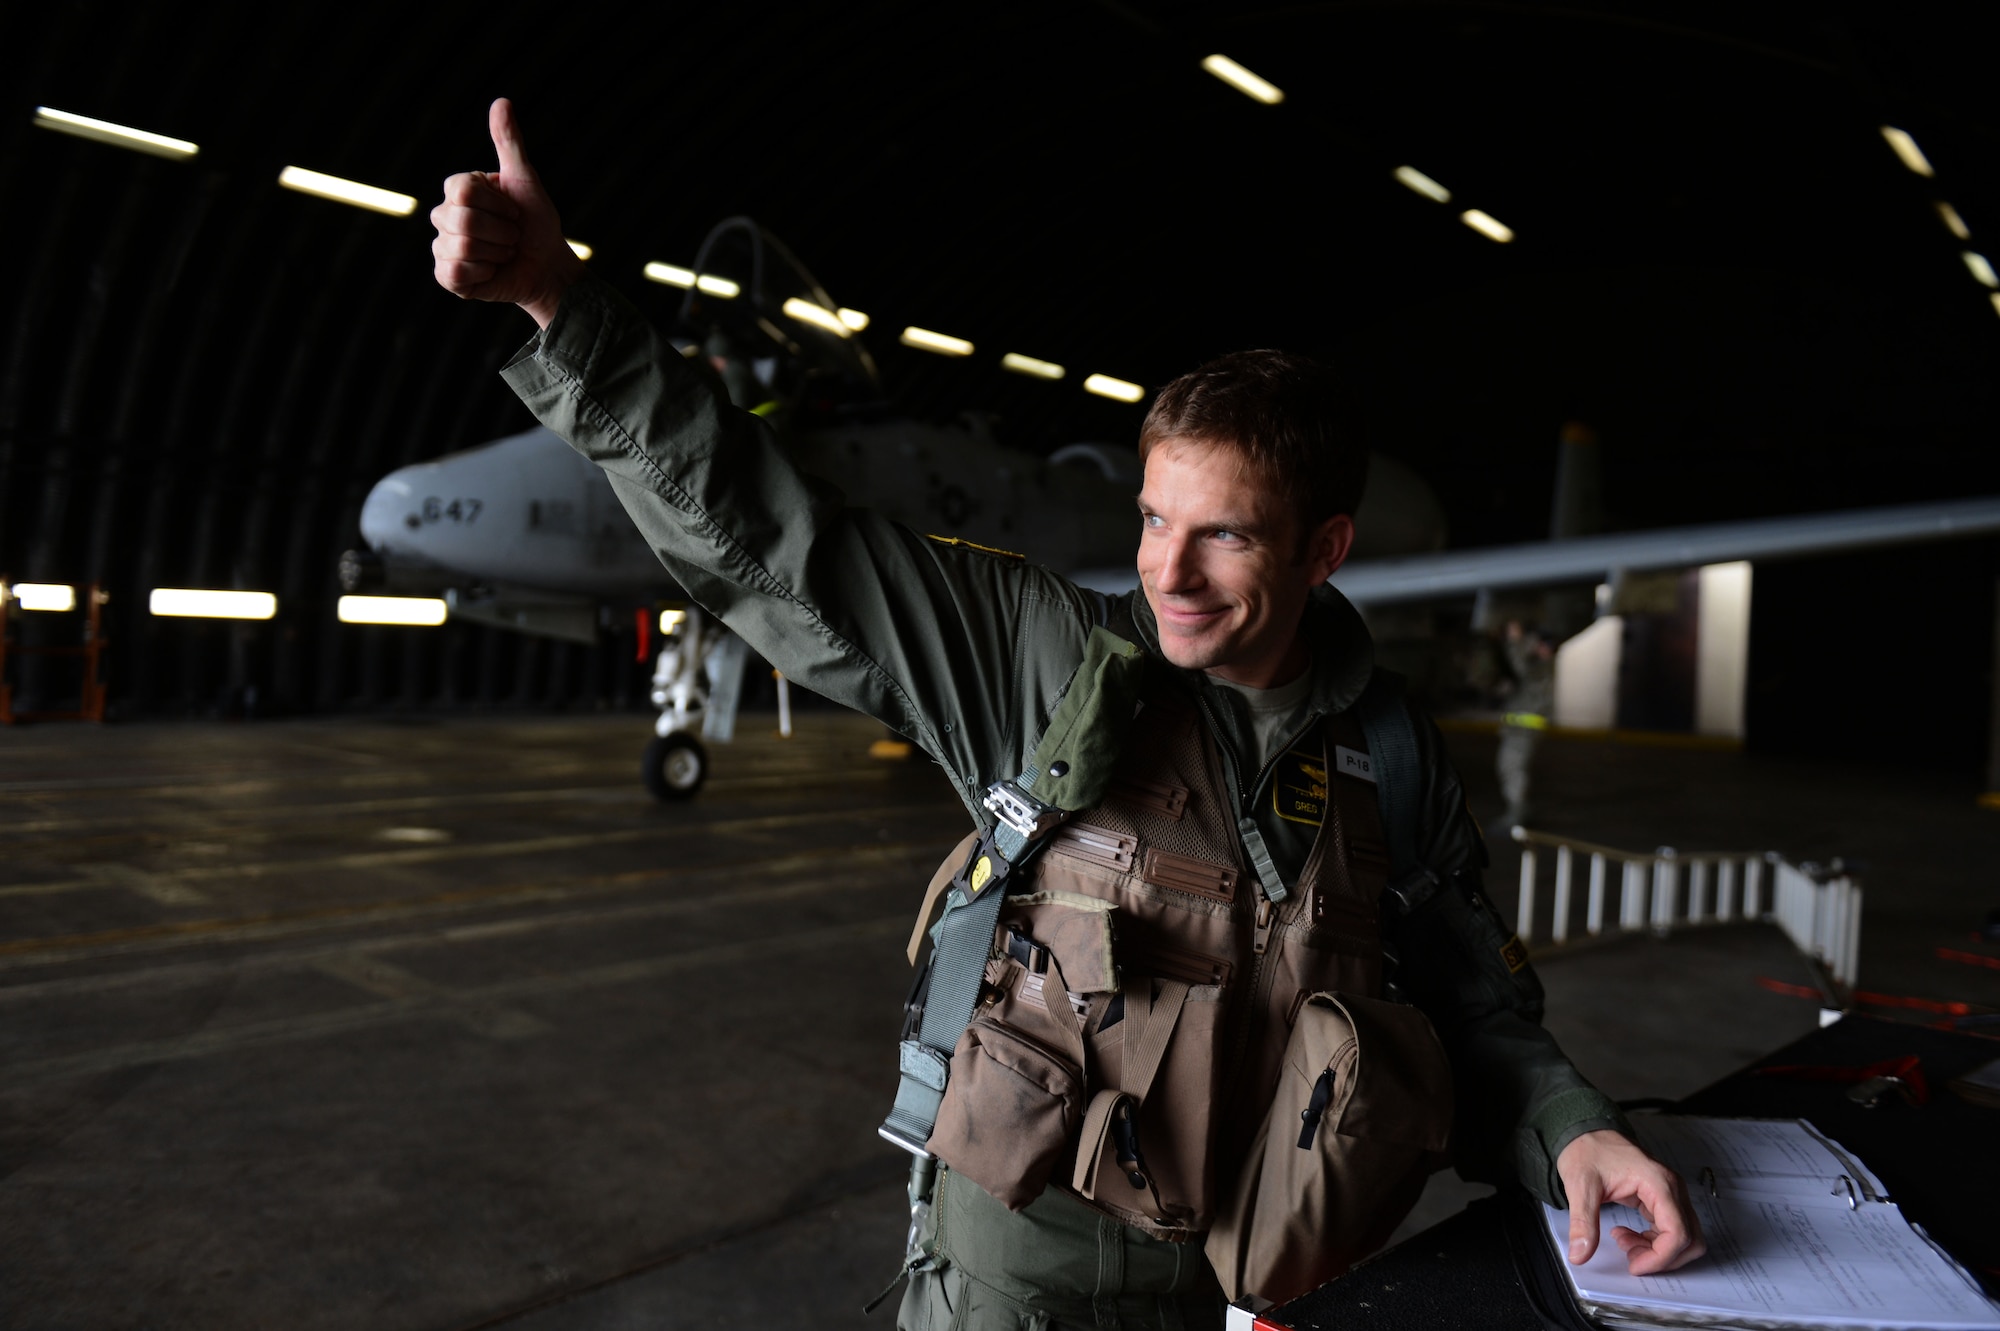 SPANGDAHLEM AIR BASE, Germany – U.S. Air Force Capt. Gregory Ulrich, 81st Fighter Squadron pilot from Fairfield, Calif., gives a thumbs-up on the flightline before departing for a tactical sortie May 14, 2013. This was the final A-10 Thunderbolt II attack aircraft tactical sortie in Europe at Spangdahlem AB. (U.S. Air Force photo by Airman 1st Class Gustavo Castillo/Released)